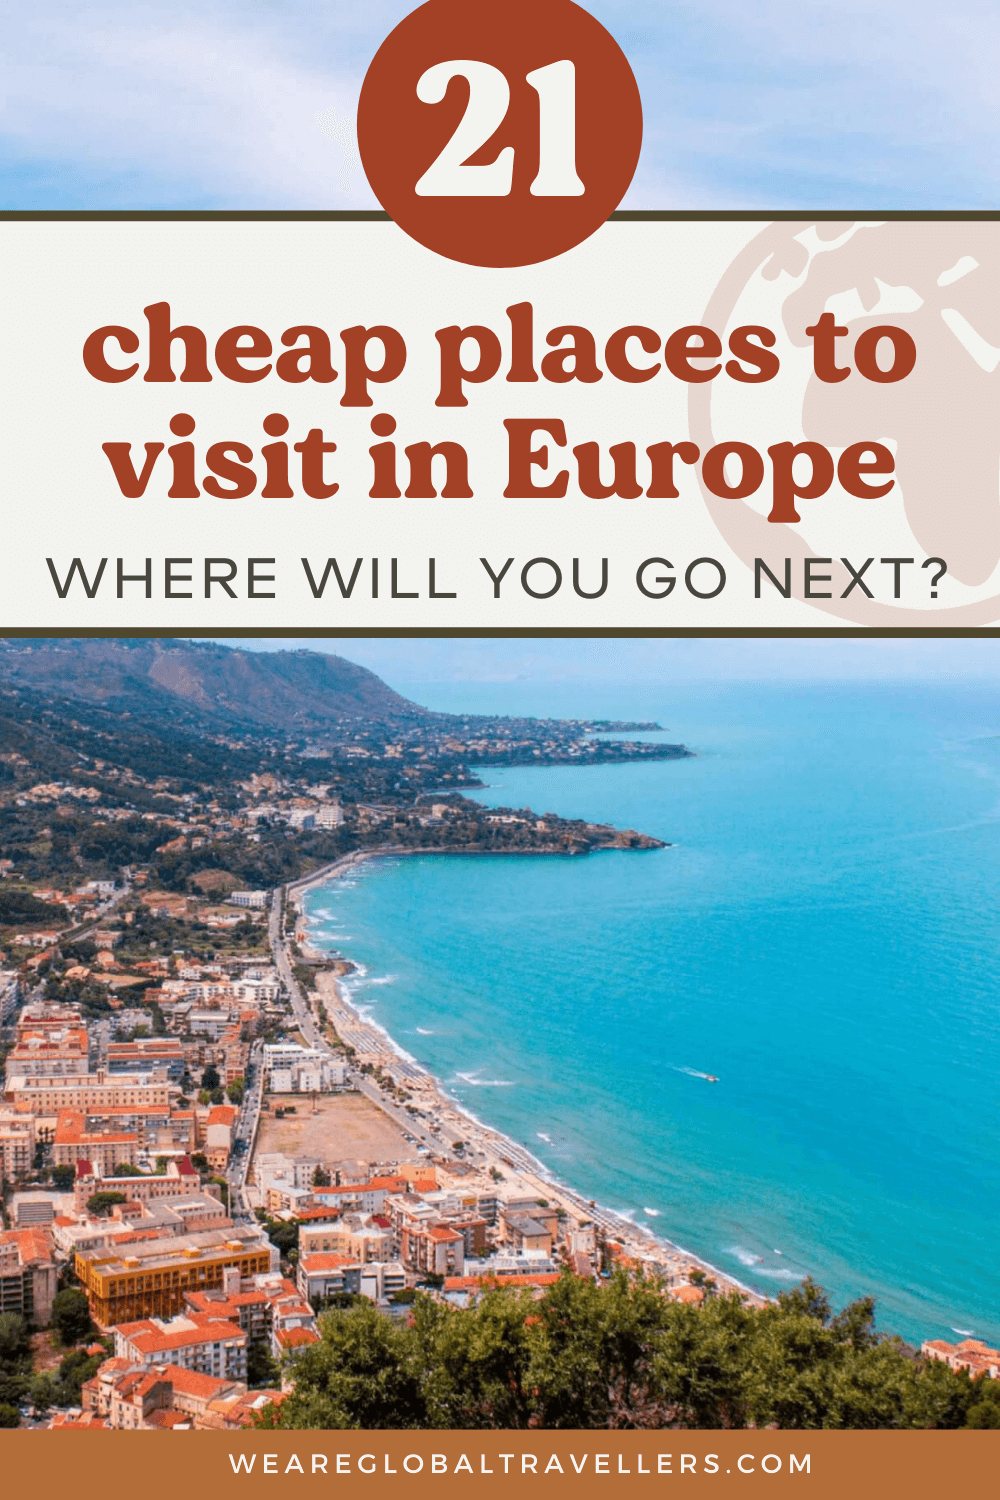 21 CHEAP places to visit in Europe